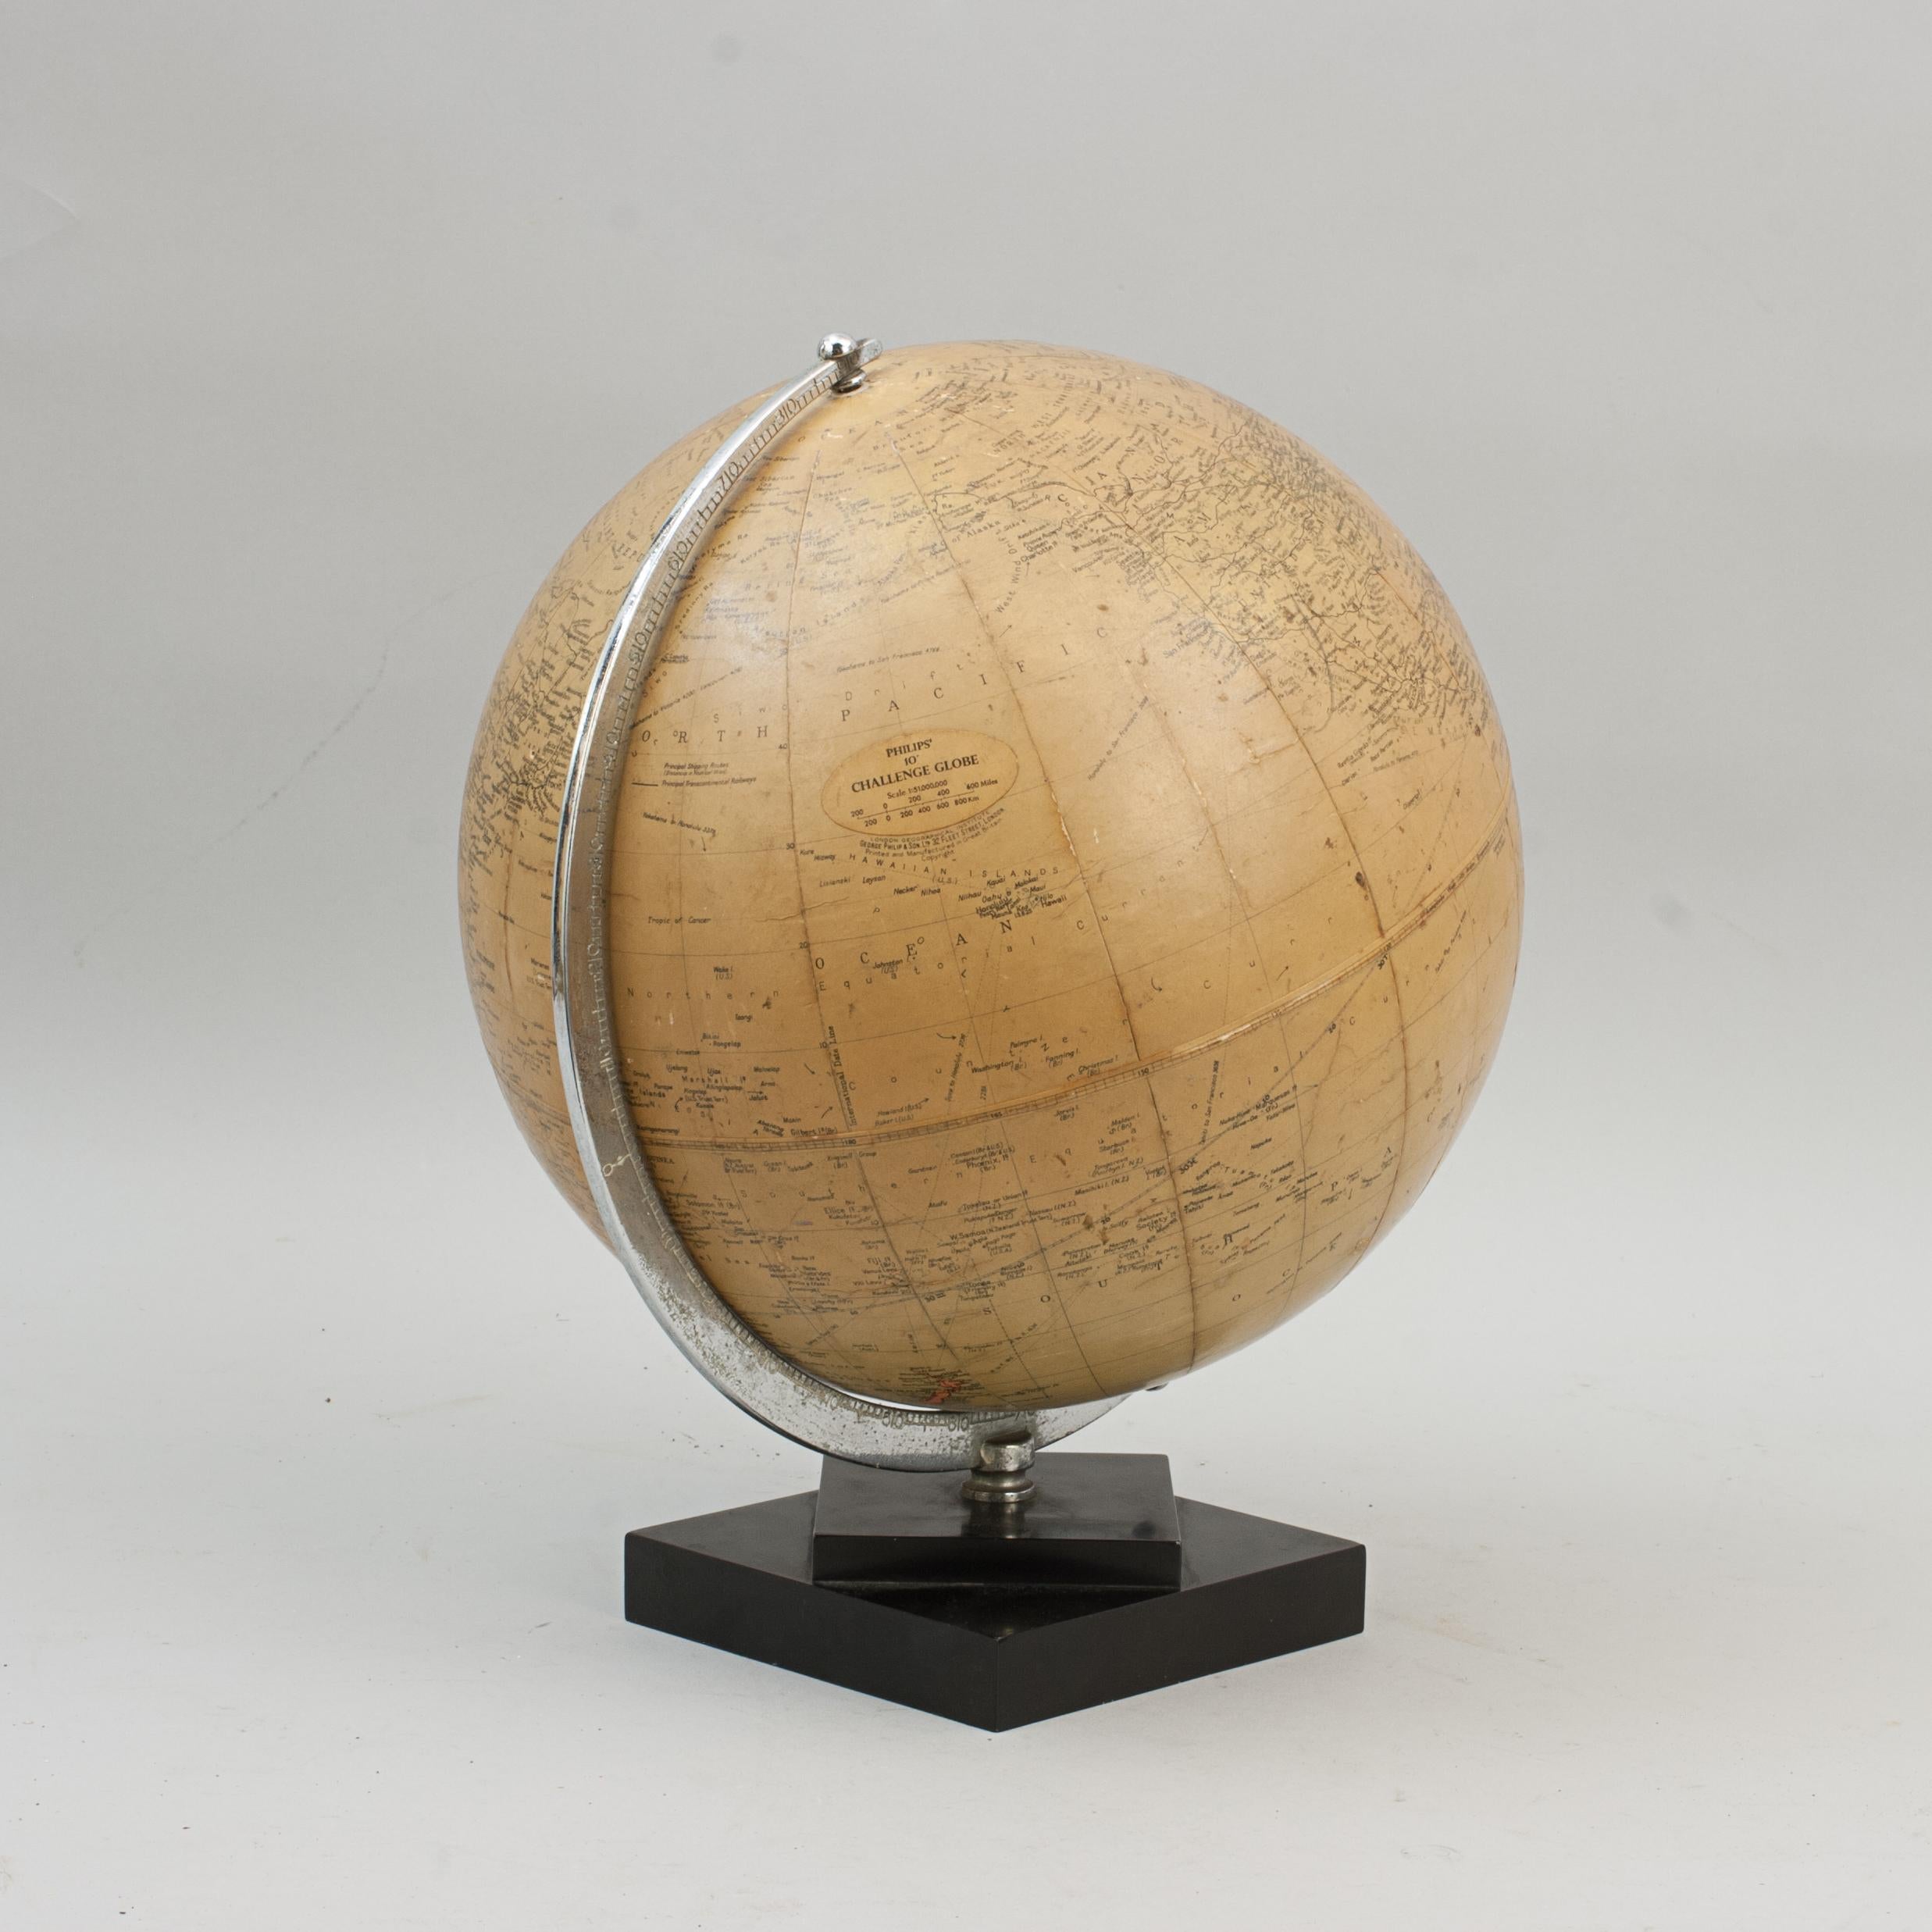 Decorative table top globe.
A miniature model of the earth, scale 1:51,000,000, made by George Philip & Son Ltd. The Philips' 10